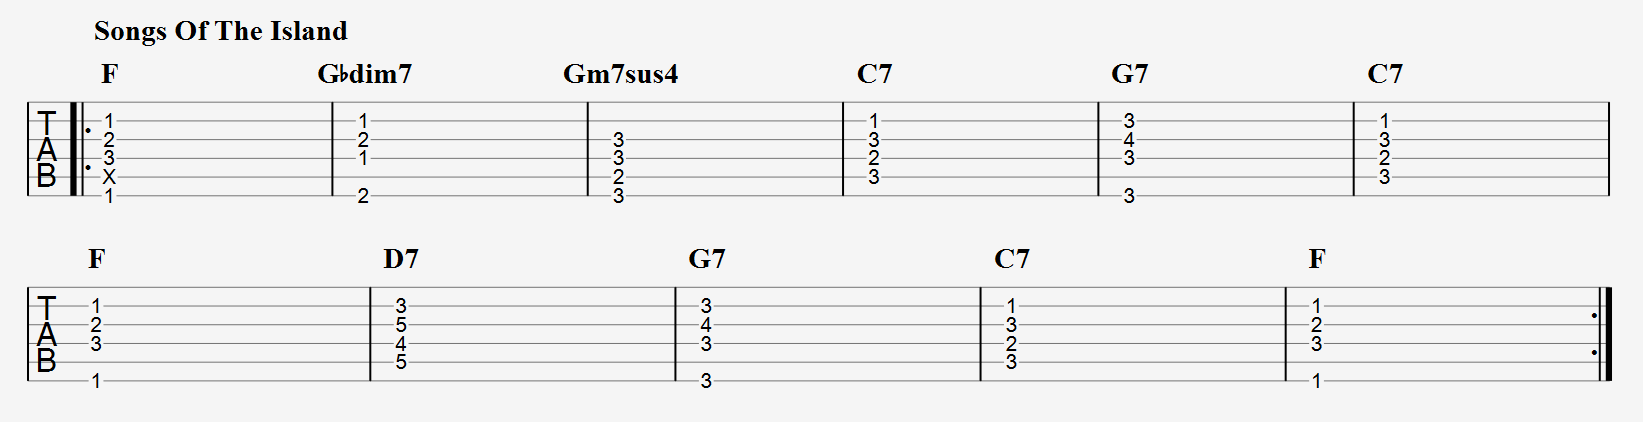 Songs Of The Island jazz chord progressions